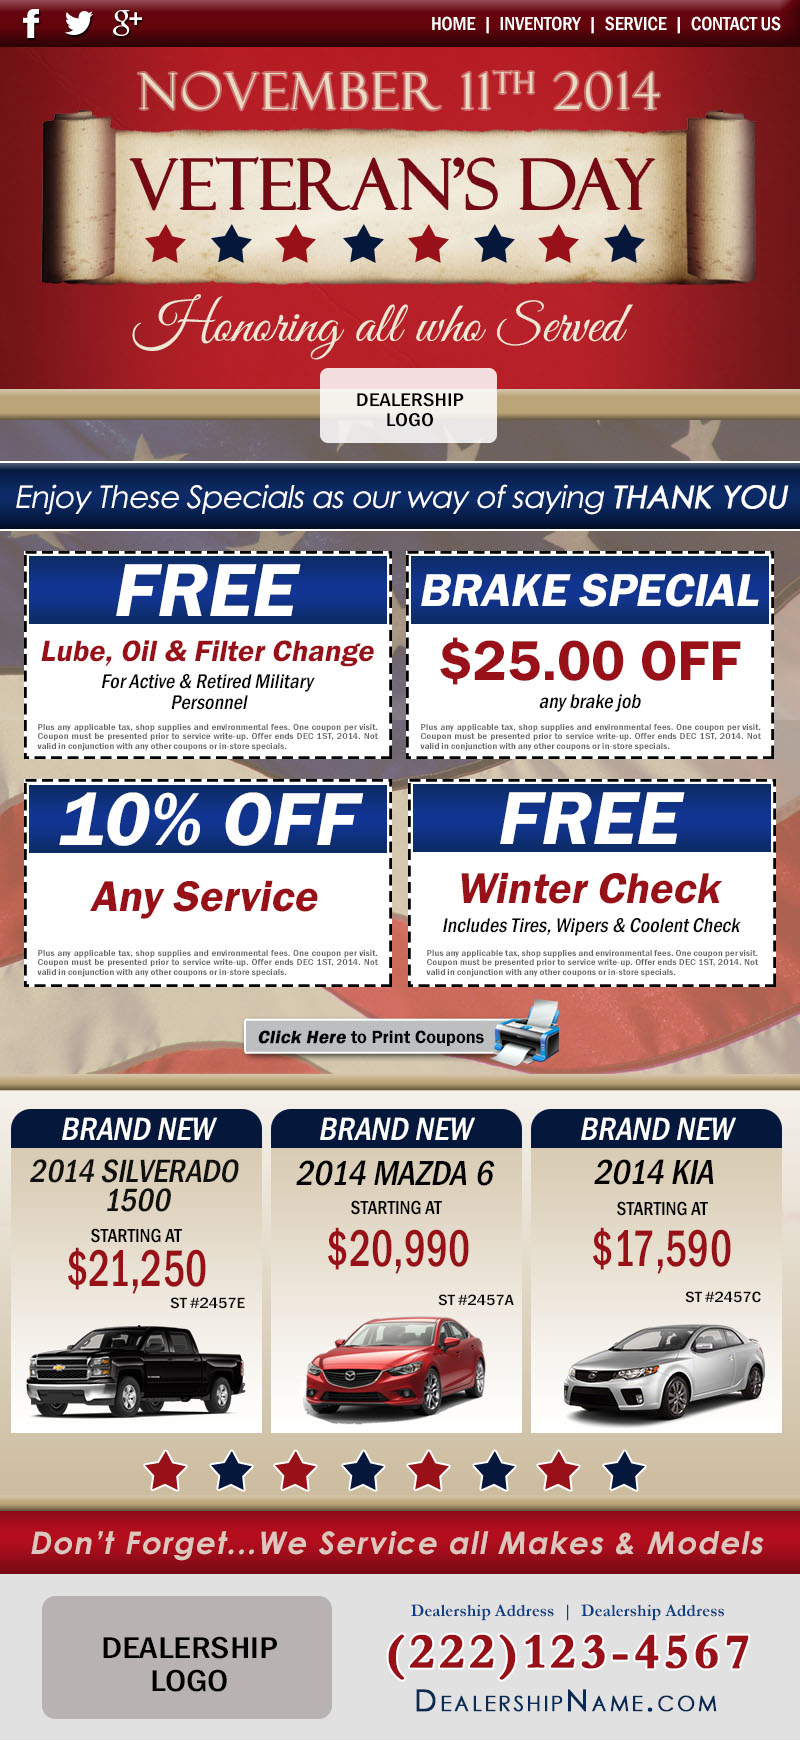 Veterans Day Sales and Service Specials Dealership for Life